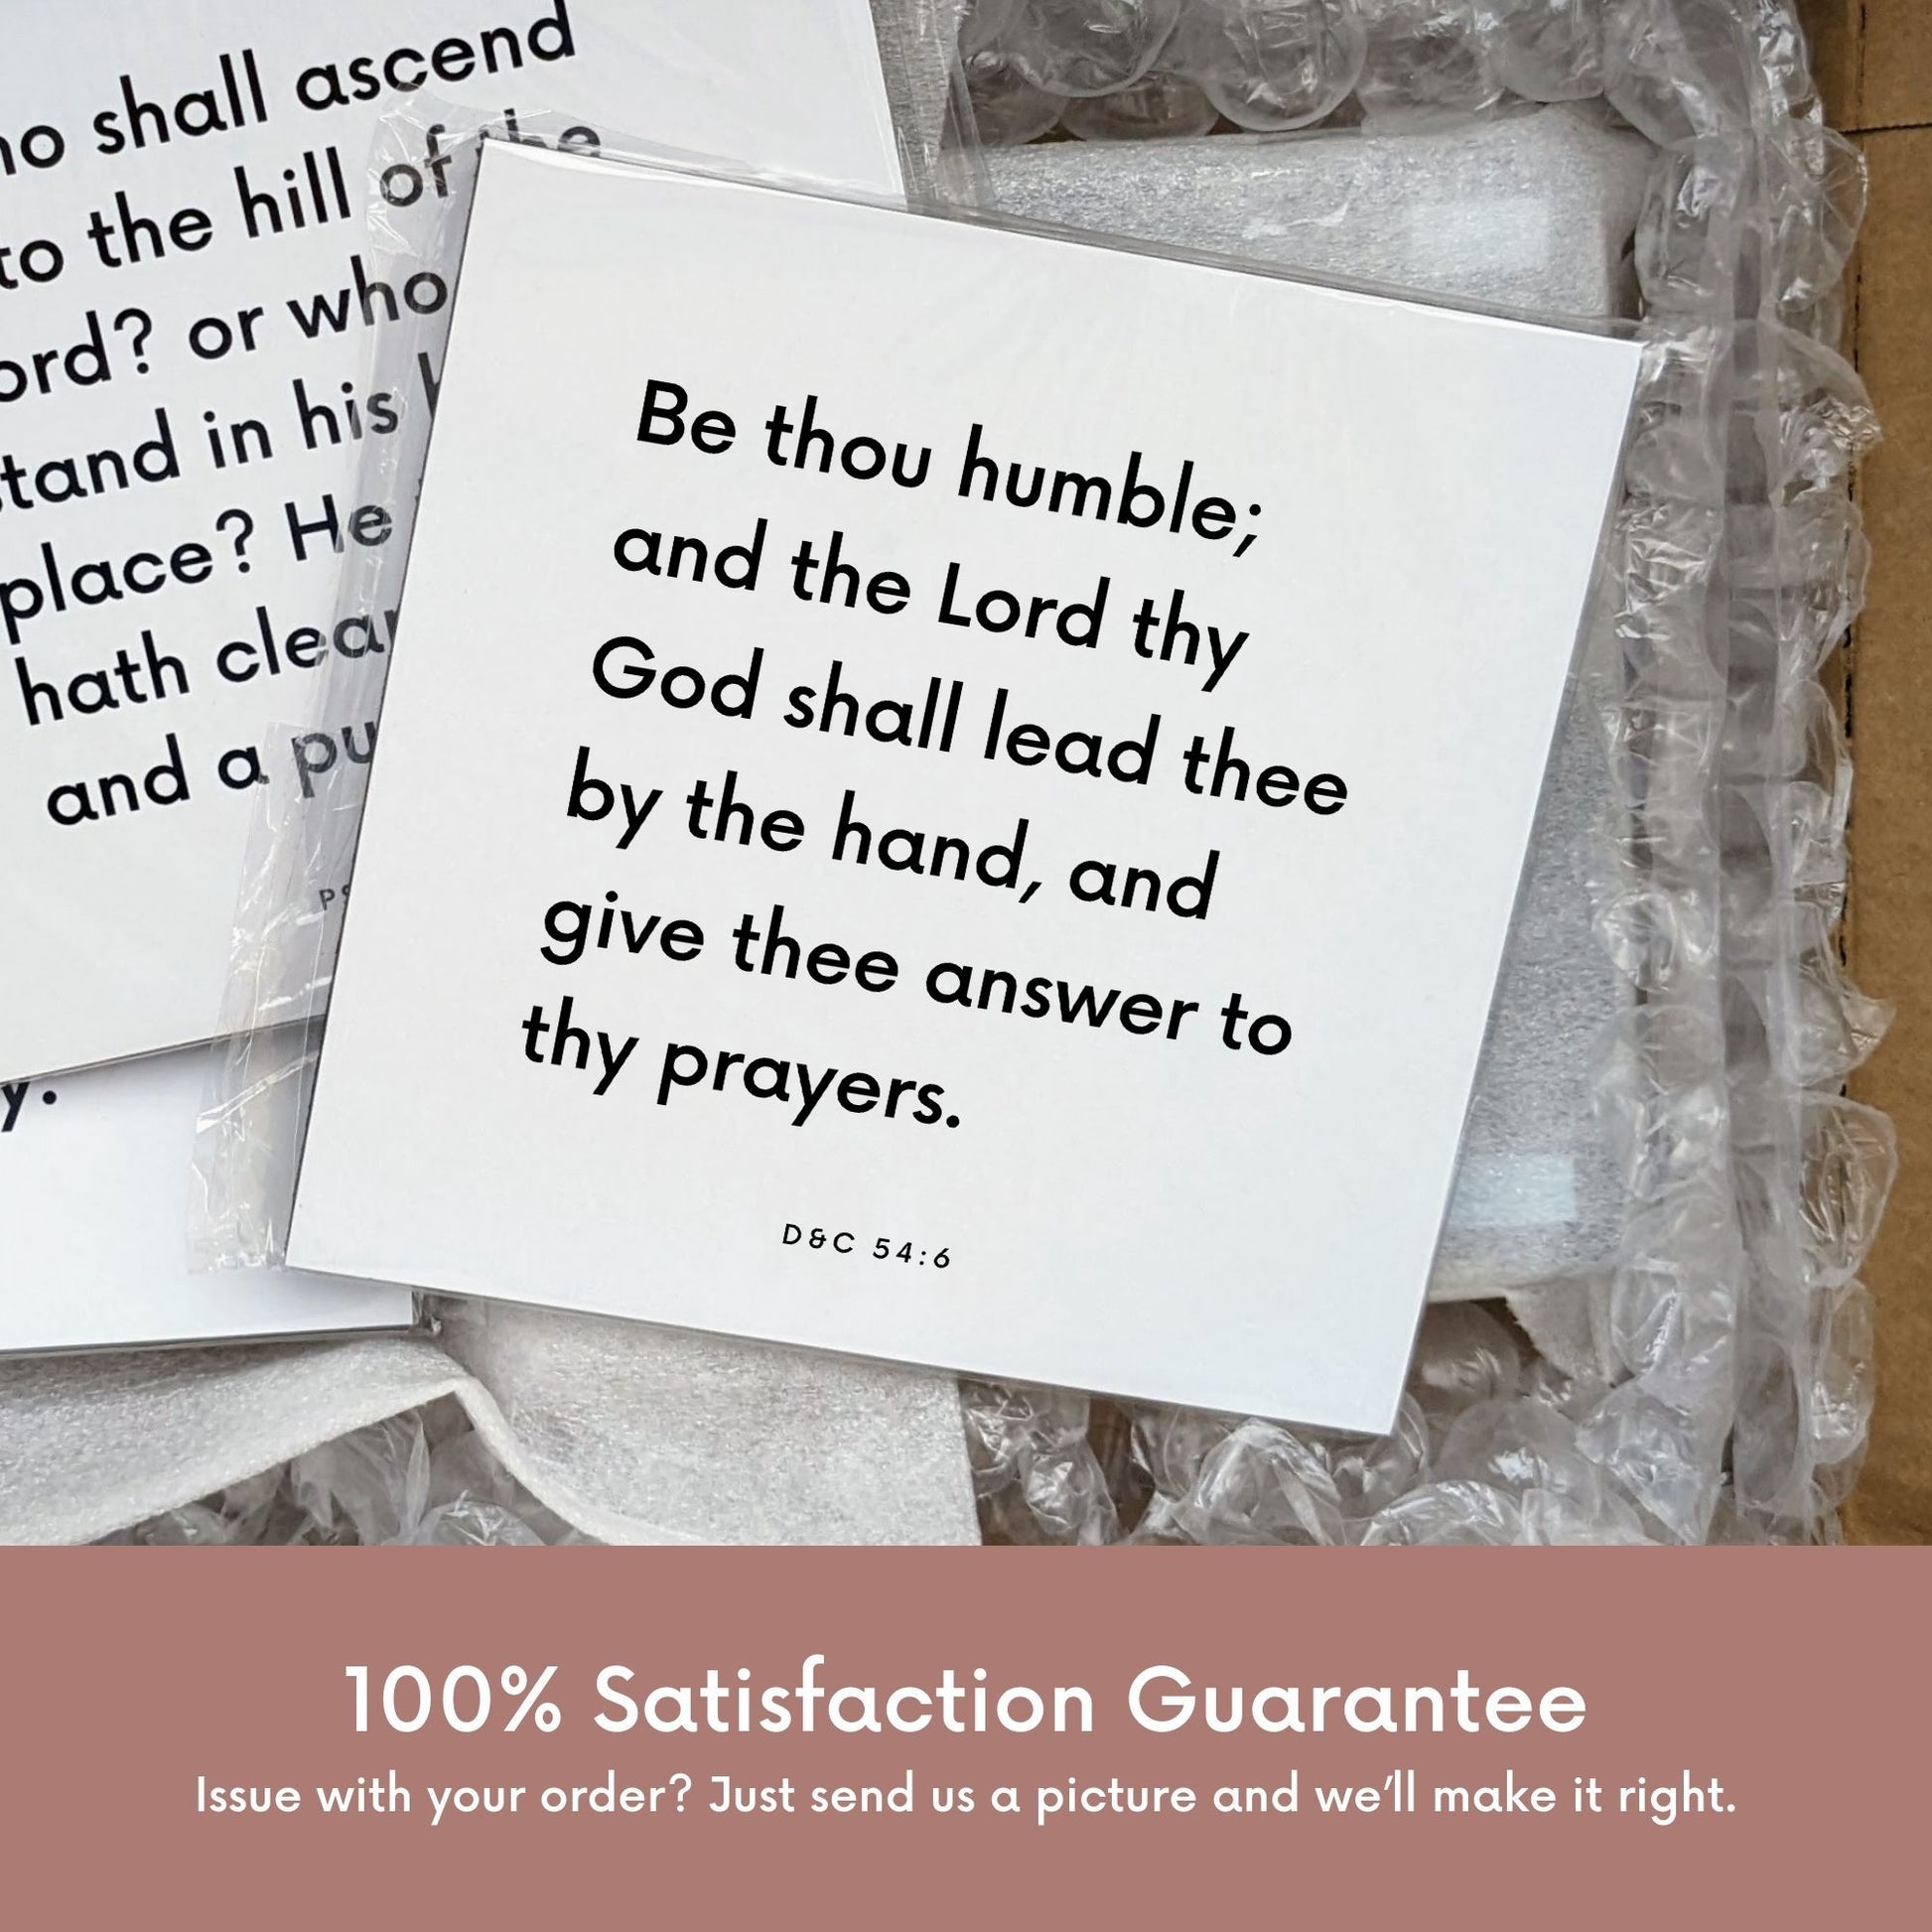 Shipping materials for scripture tile of D&C 112:10 - "Be thou humble; and the Lord thy God shall lead thee"